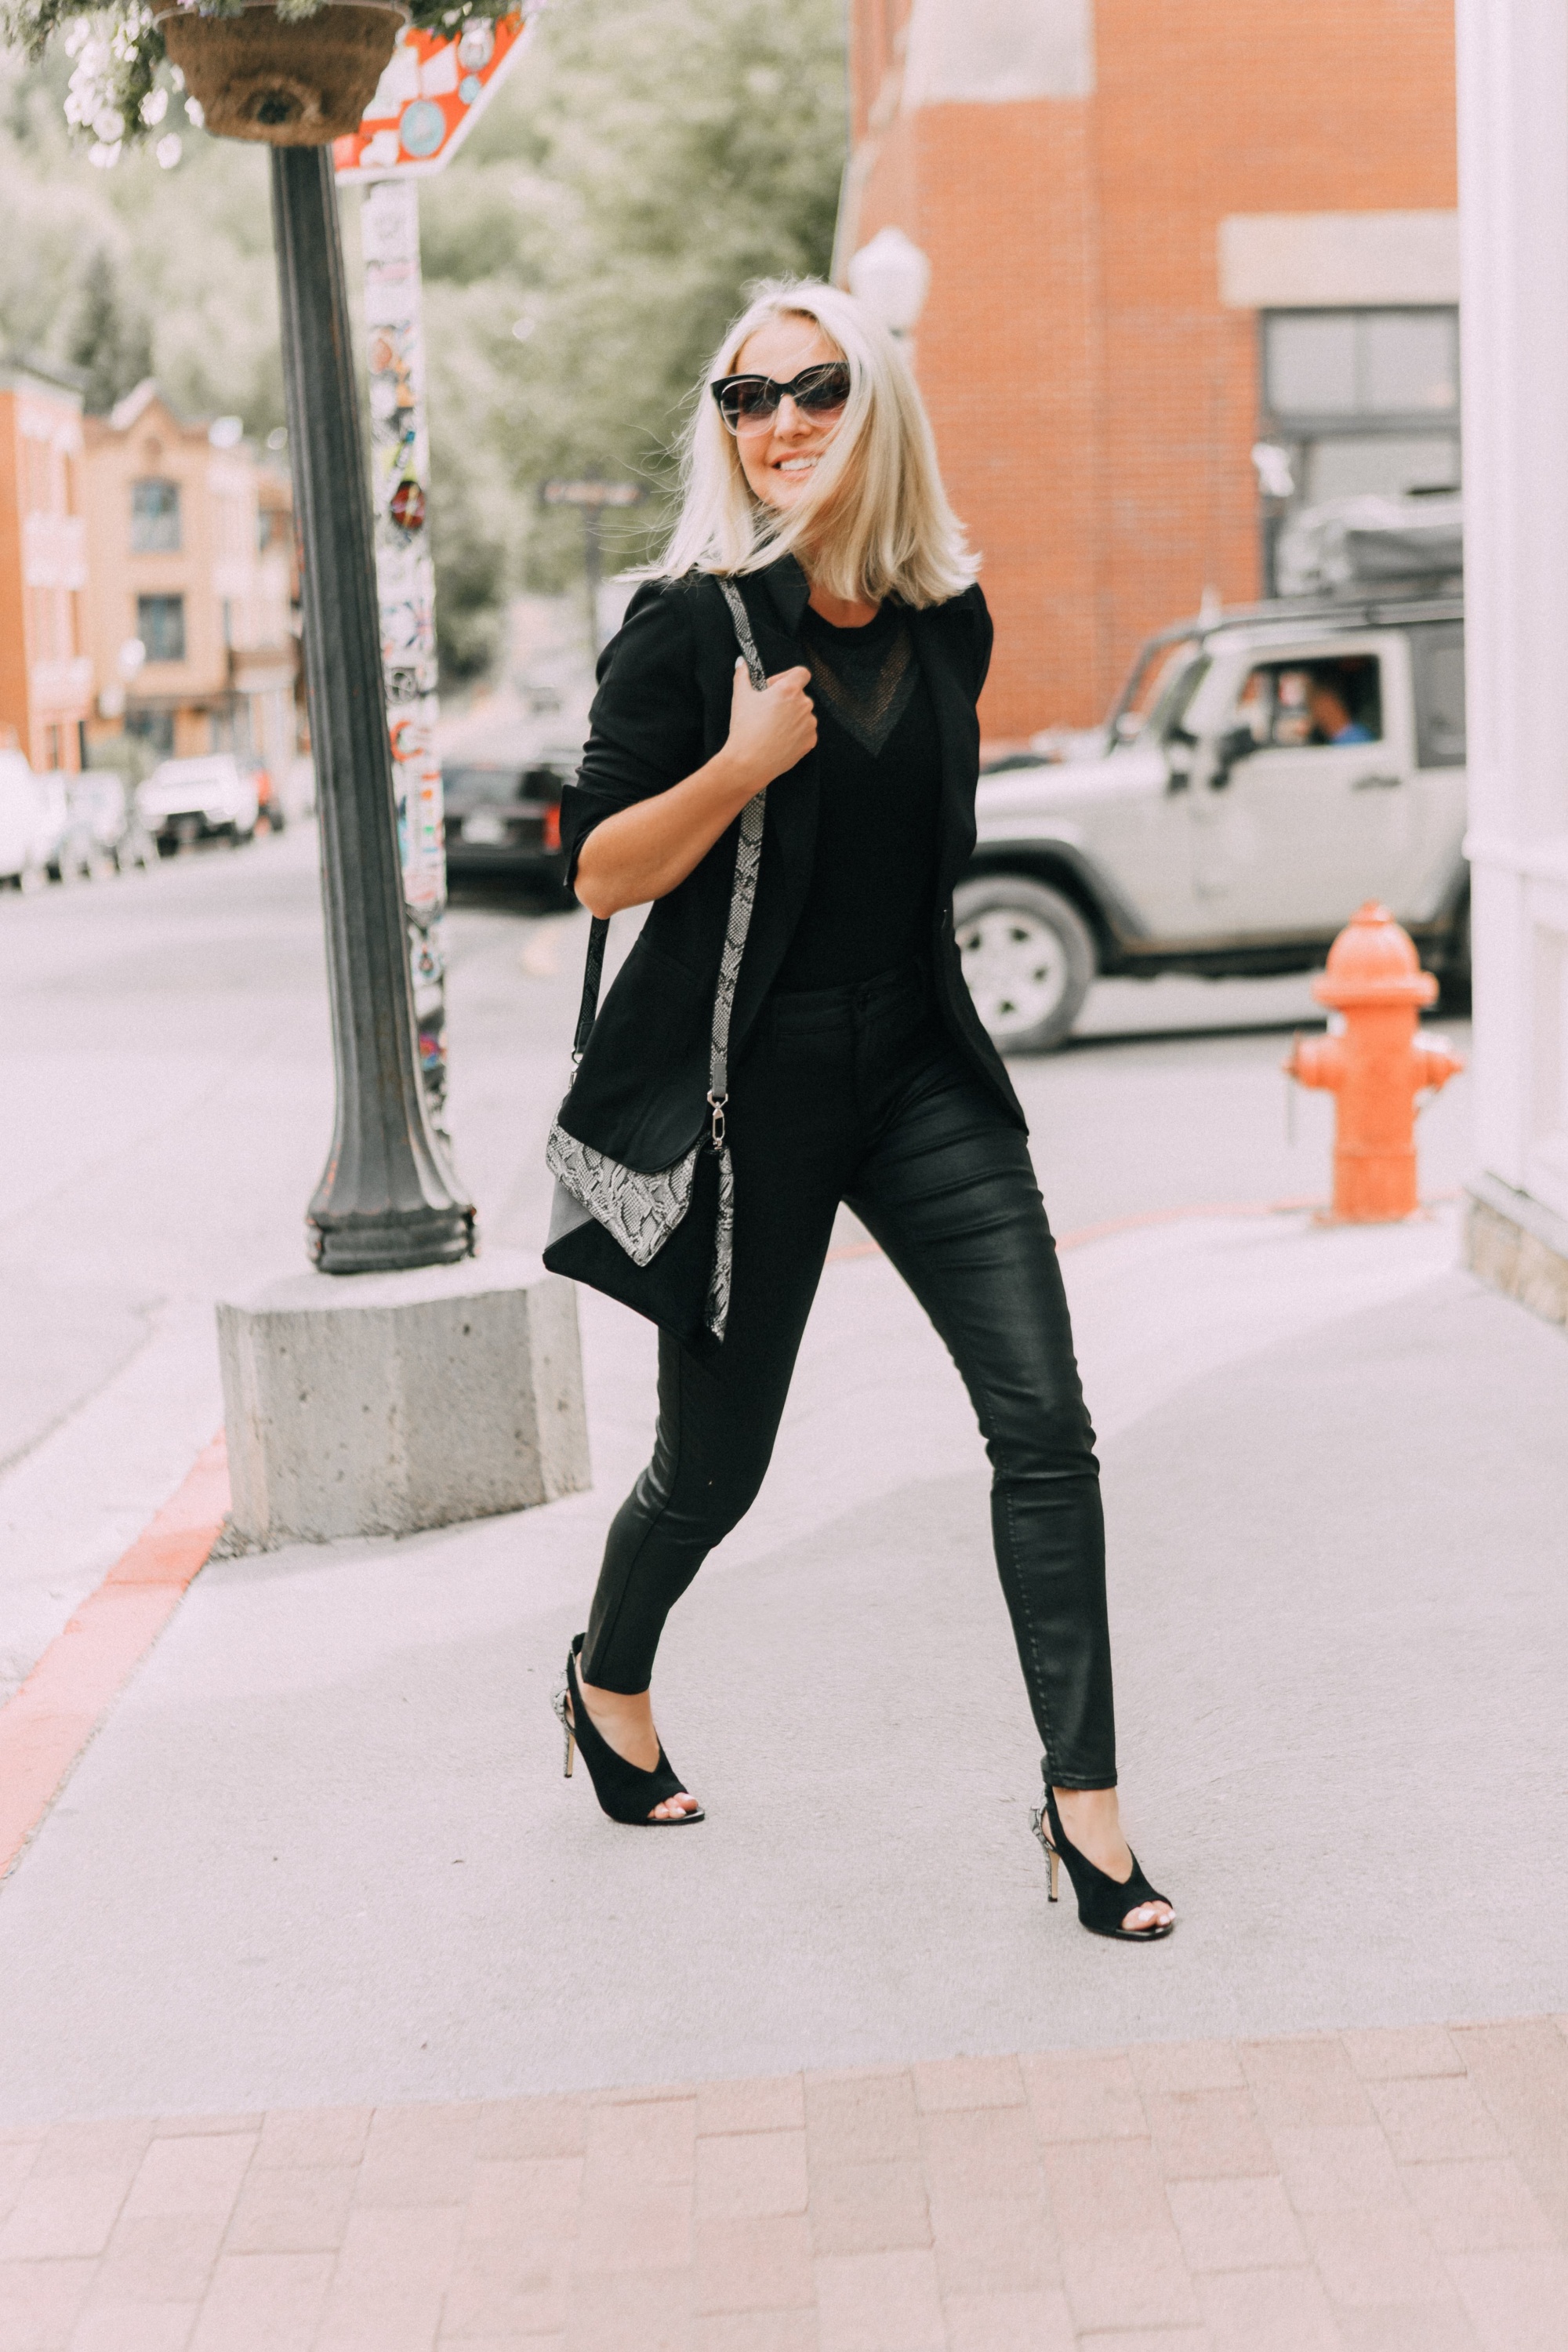 Coated Jeans, Fashion blogger Erin Busbee of BusbeeStyle.com wearing a head to toe all-black look by White House Black Market including coated jeans, python accented bag and heels, sleeveless sweater, and black blazer in Telluride, CO